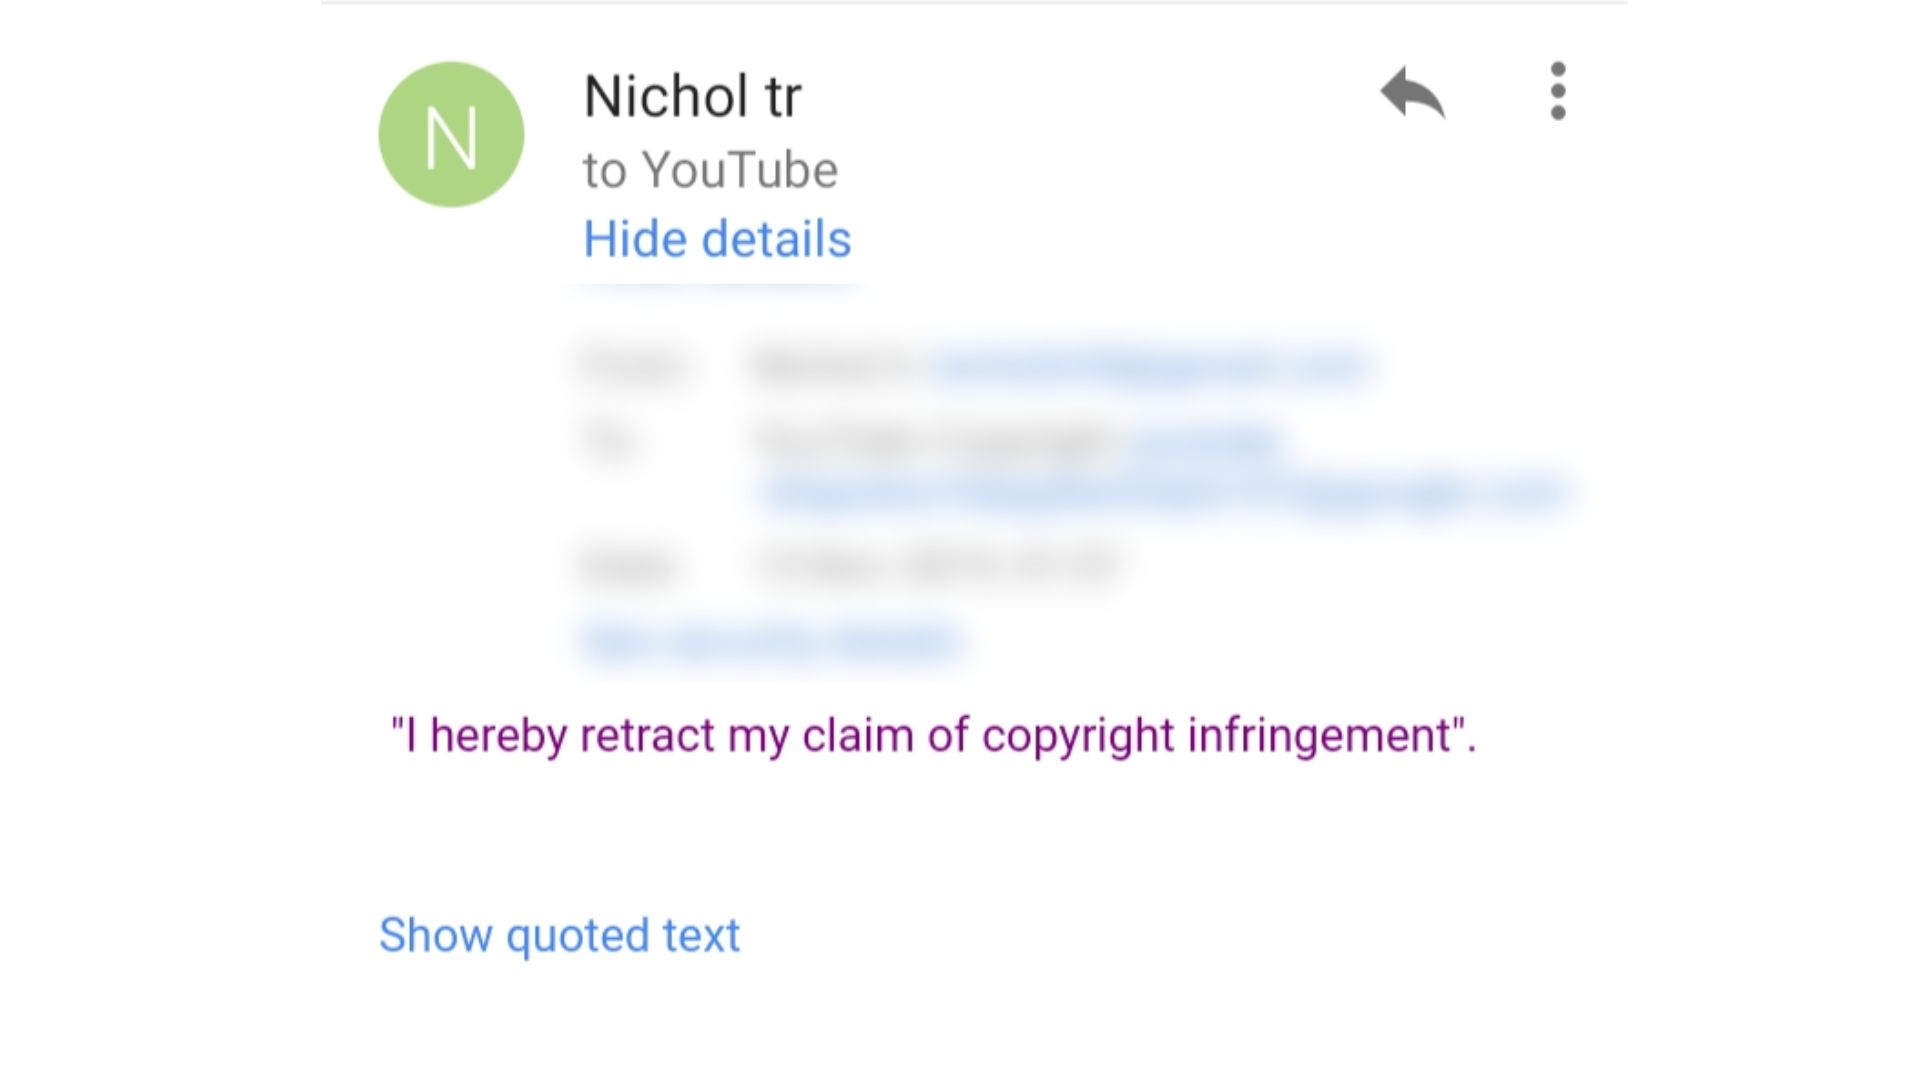 The Process To Retract The Copyright Claim On YouTube